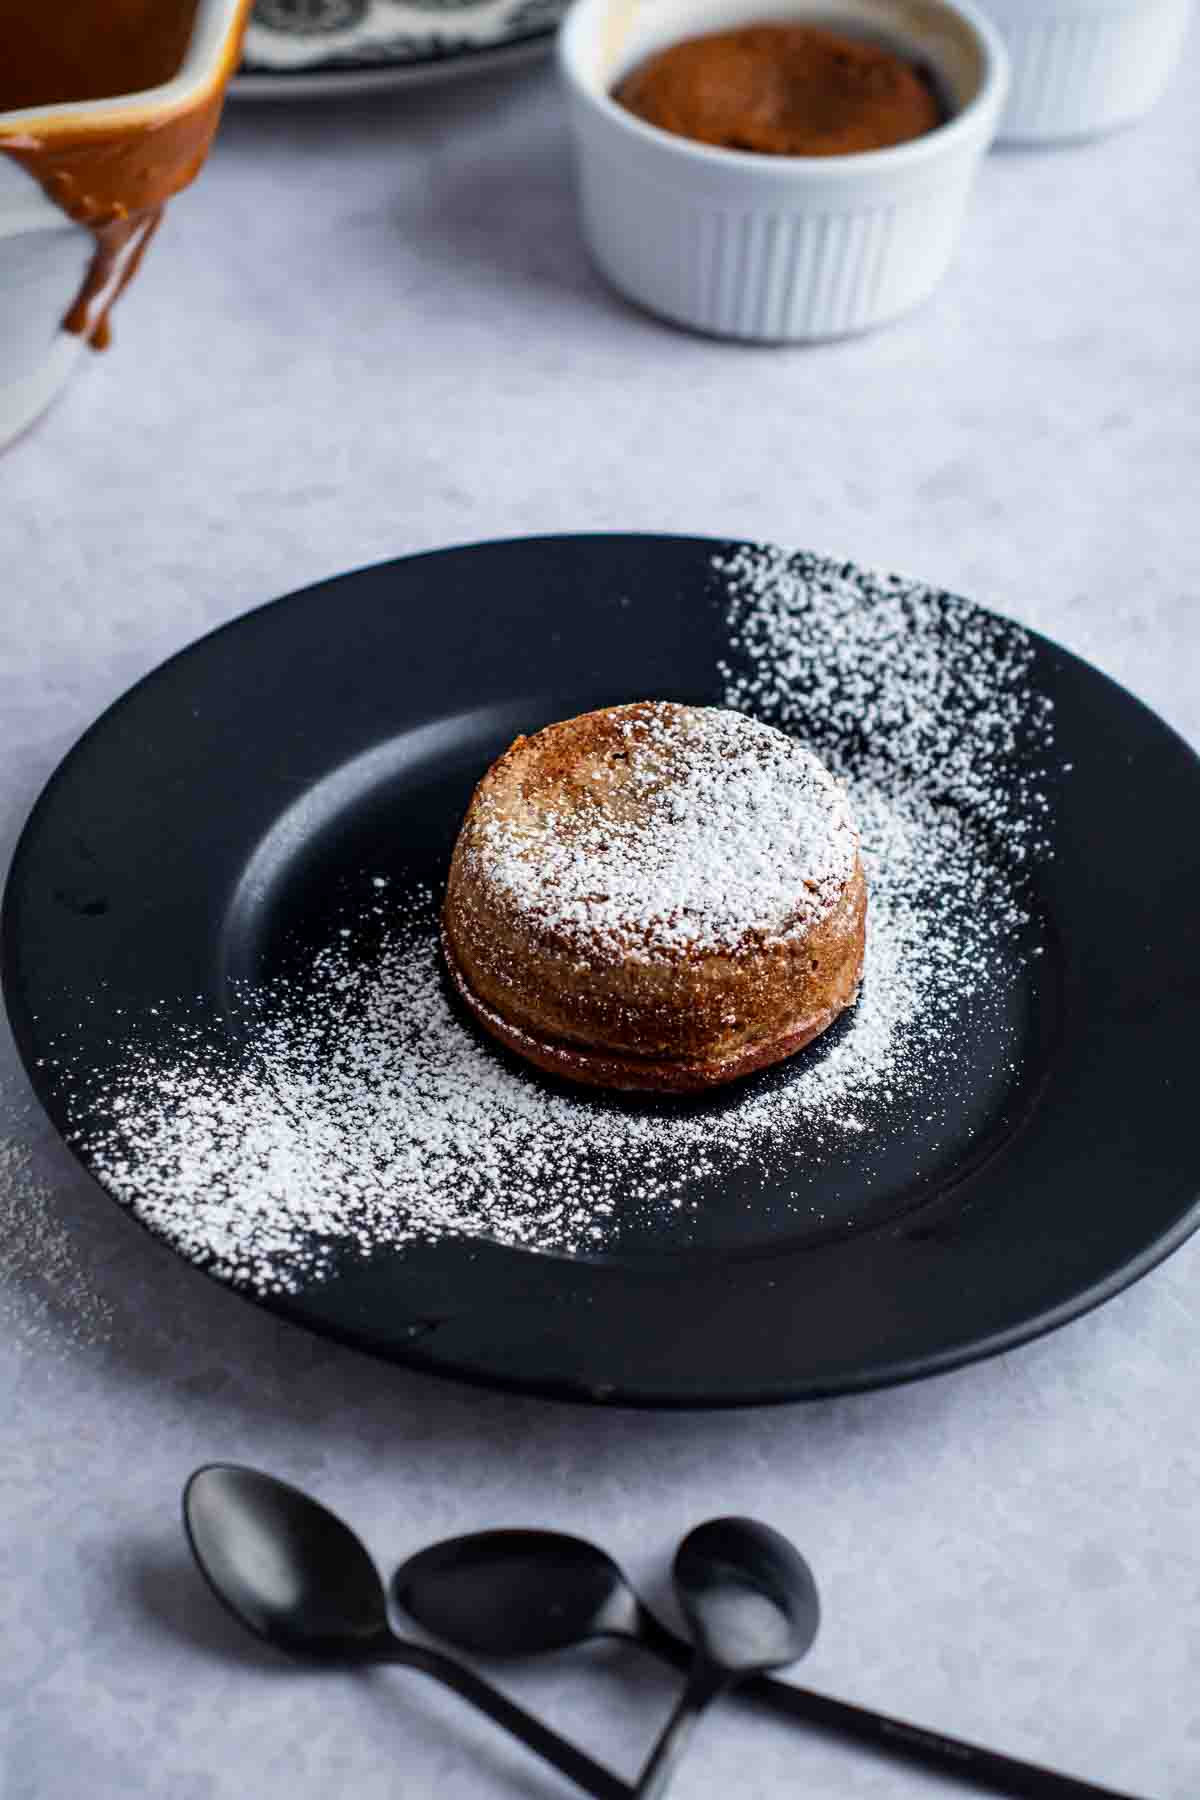 A Dulce de Leche lava cake, decorated with icing sugar, on a black plate, waiting to be cut into.